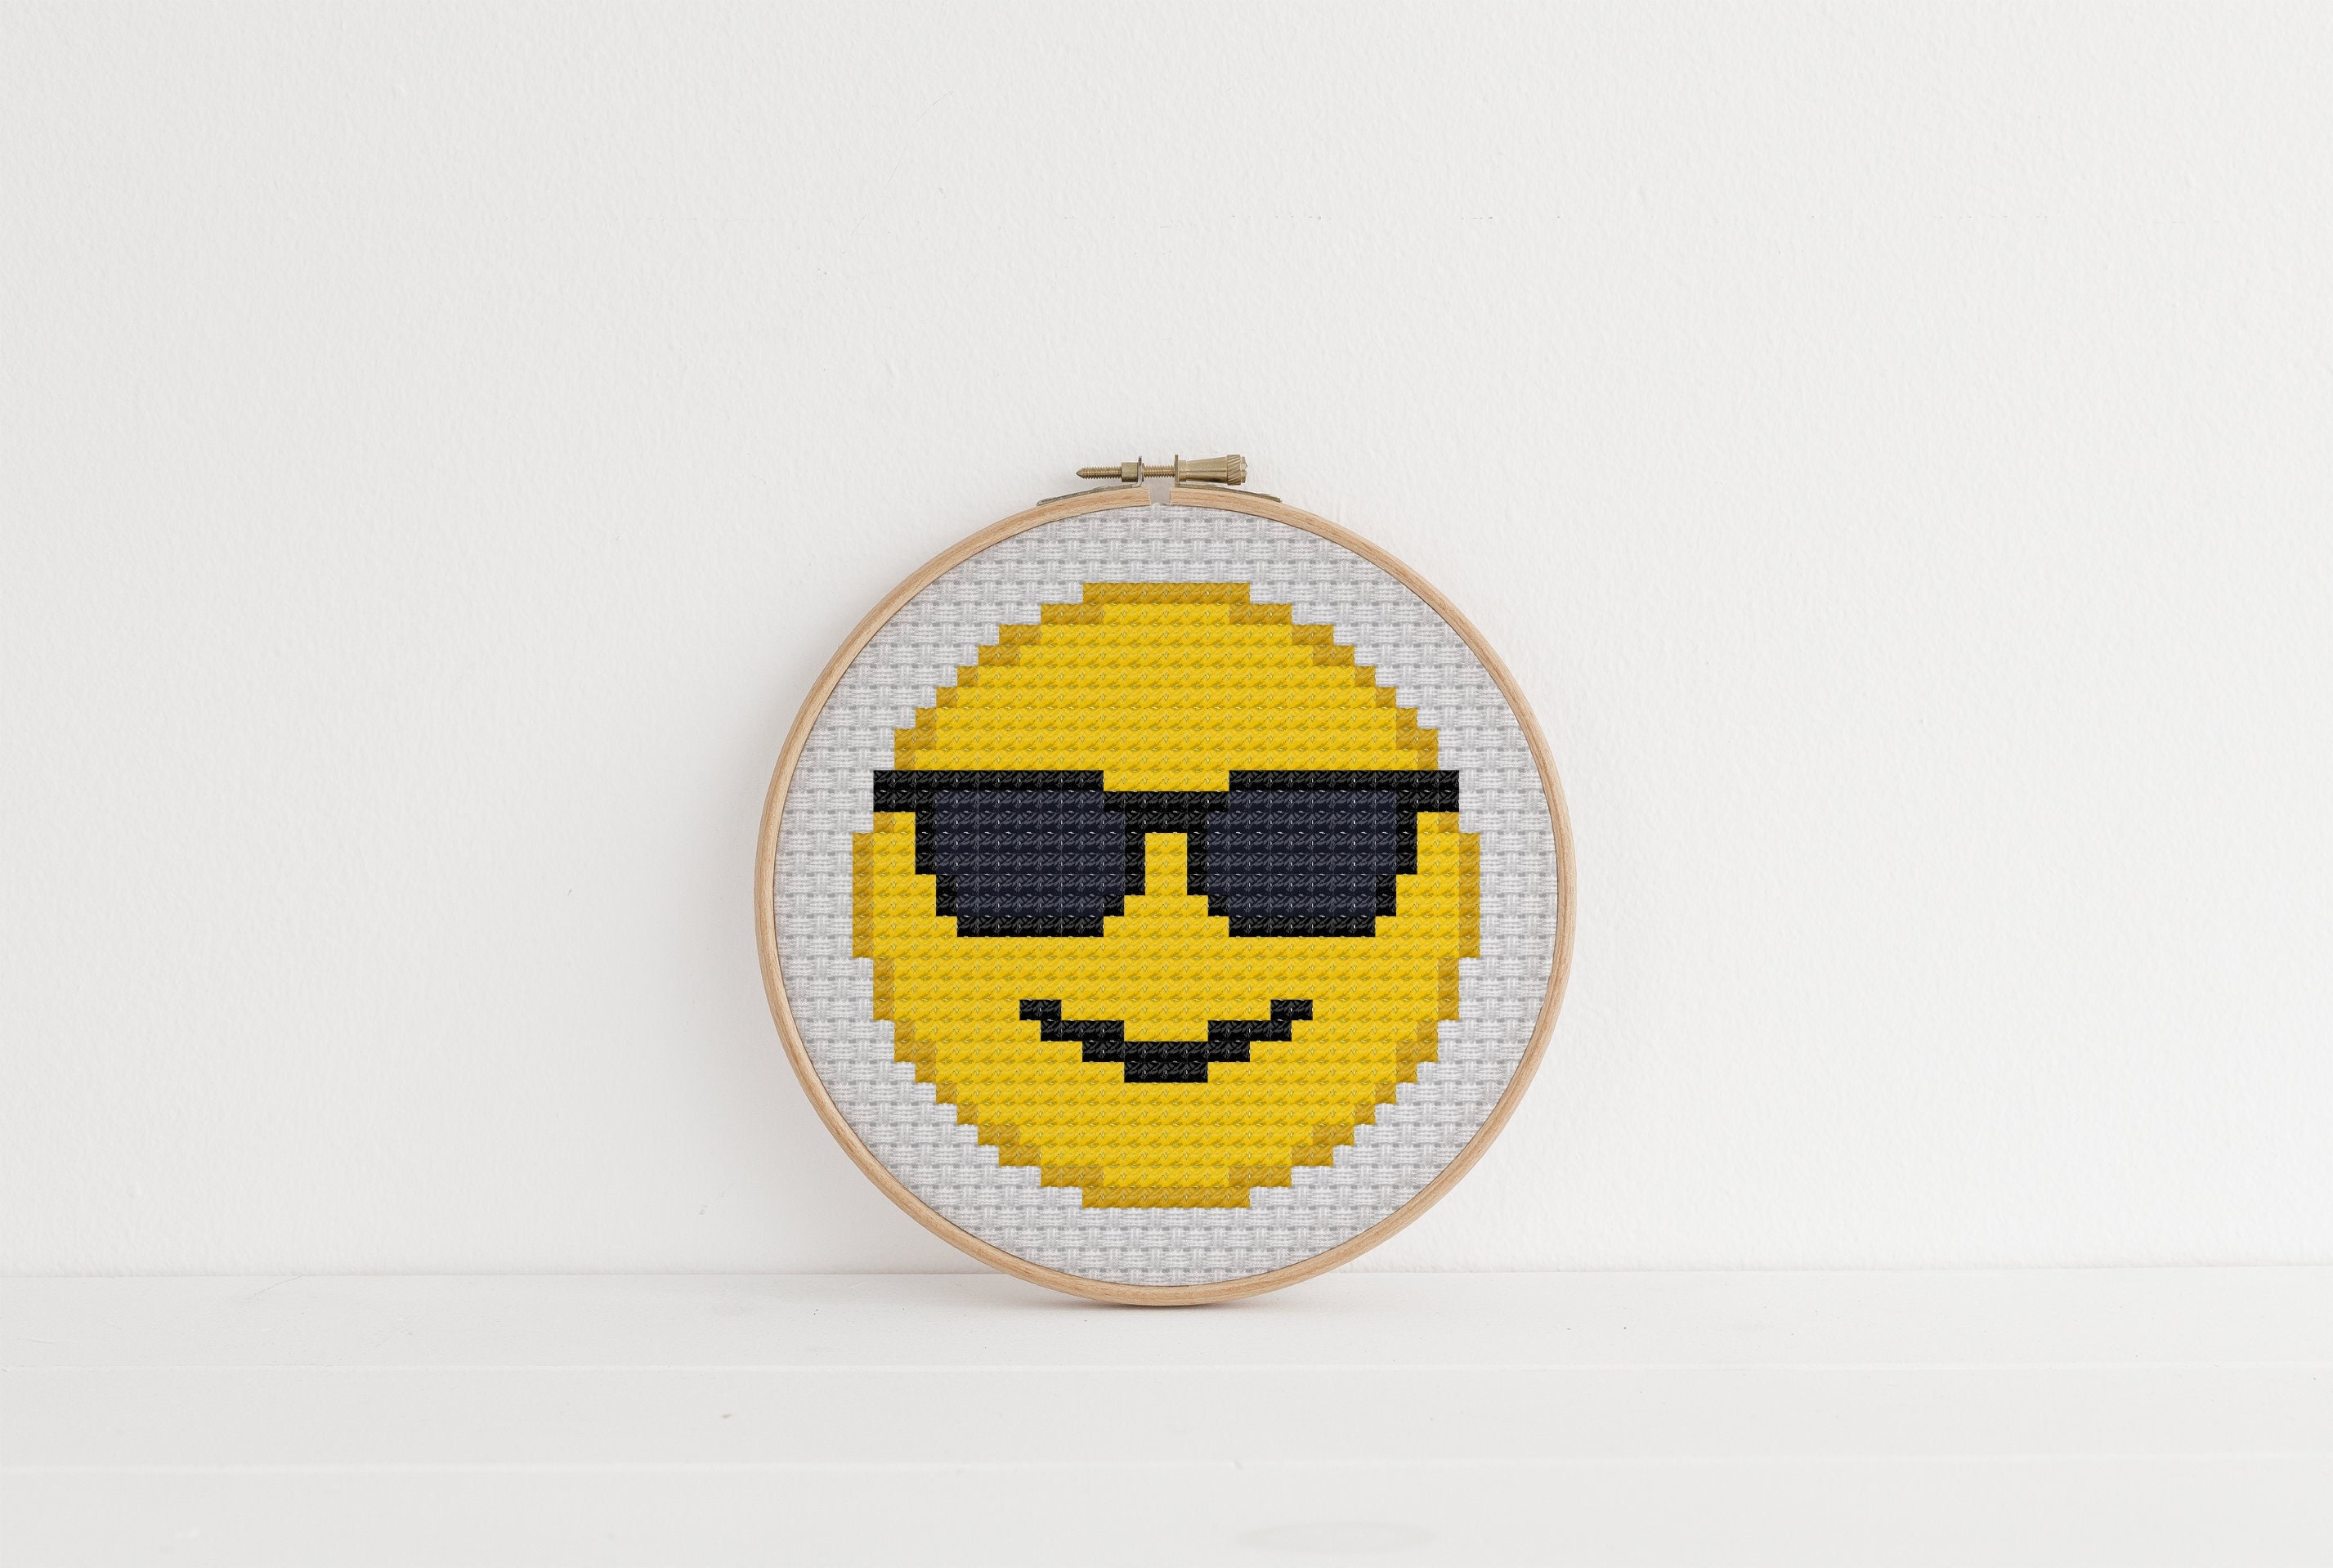 Rare Vintage Smiley Collectibe Toy Emoji Wearing Sunglasses Full